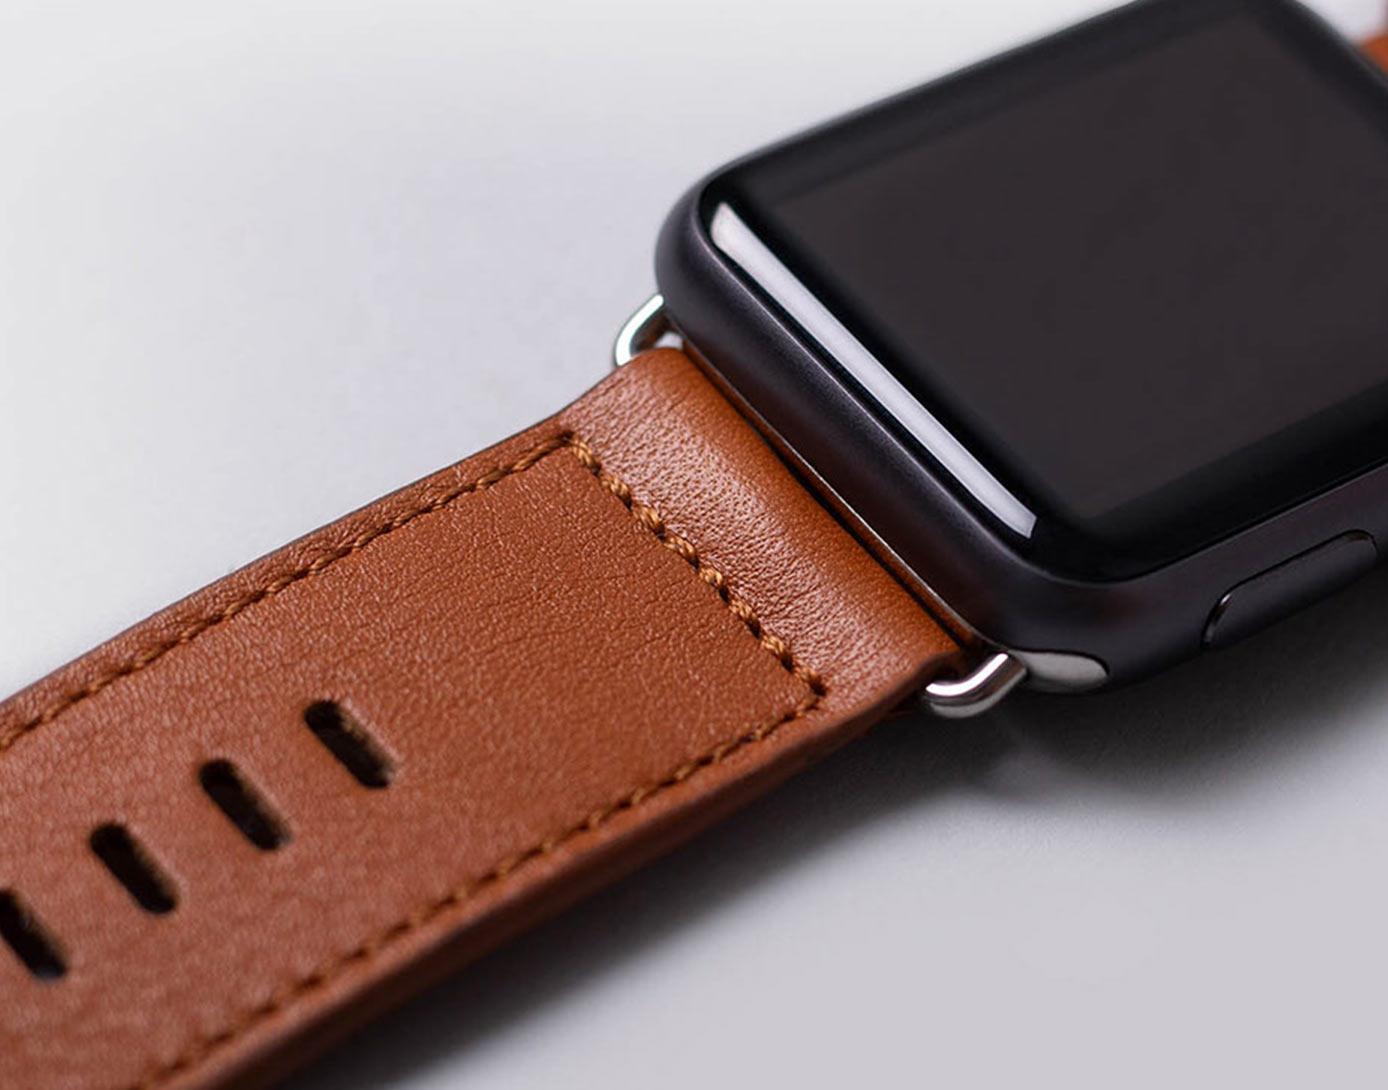 Handcrafted leather band for Apple Watch